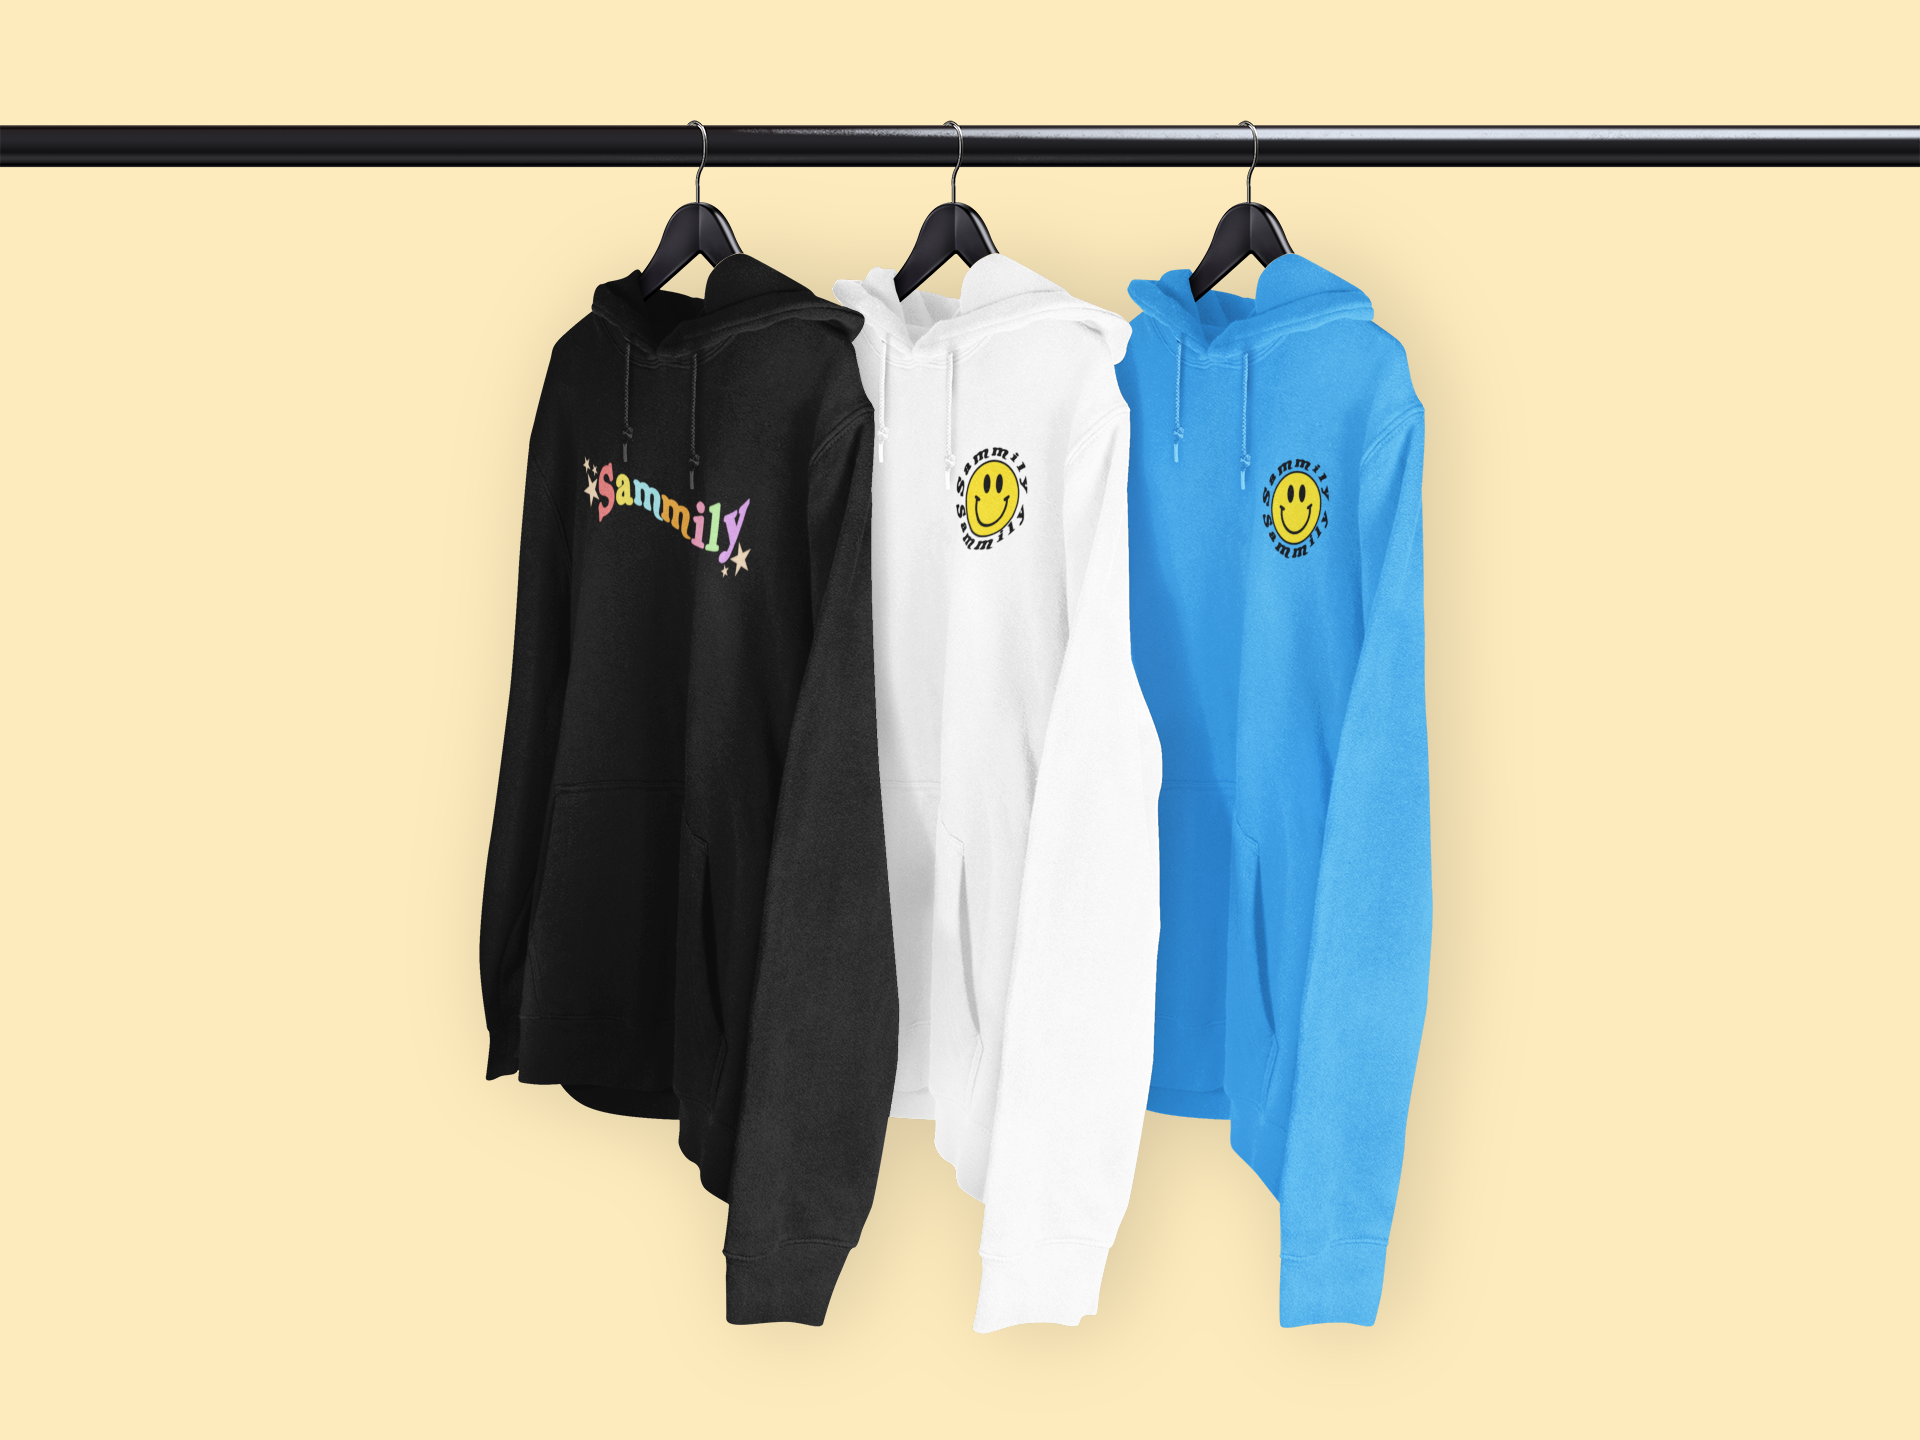 mockup-of-three-pullover-hoodies-hanging-from-a-rack-3587-el1 (1).PNG